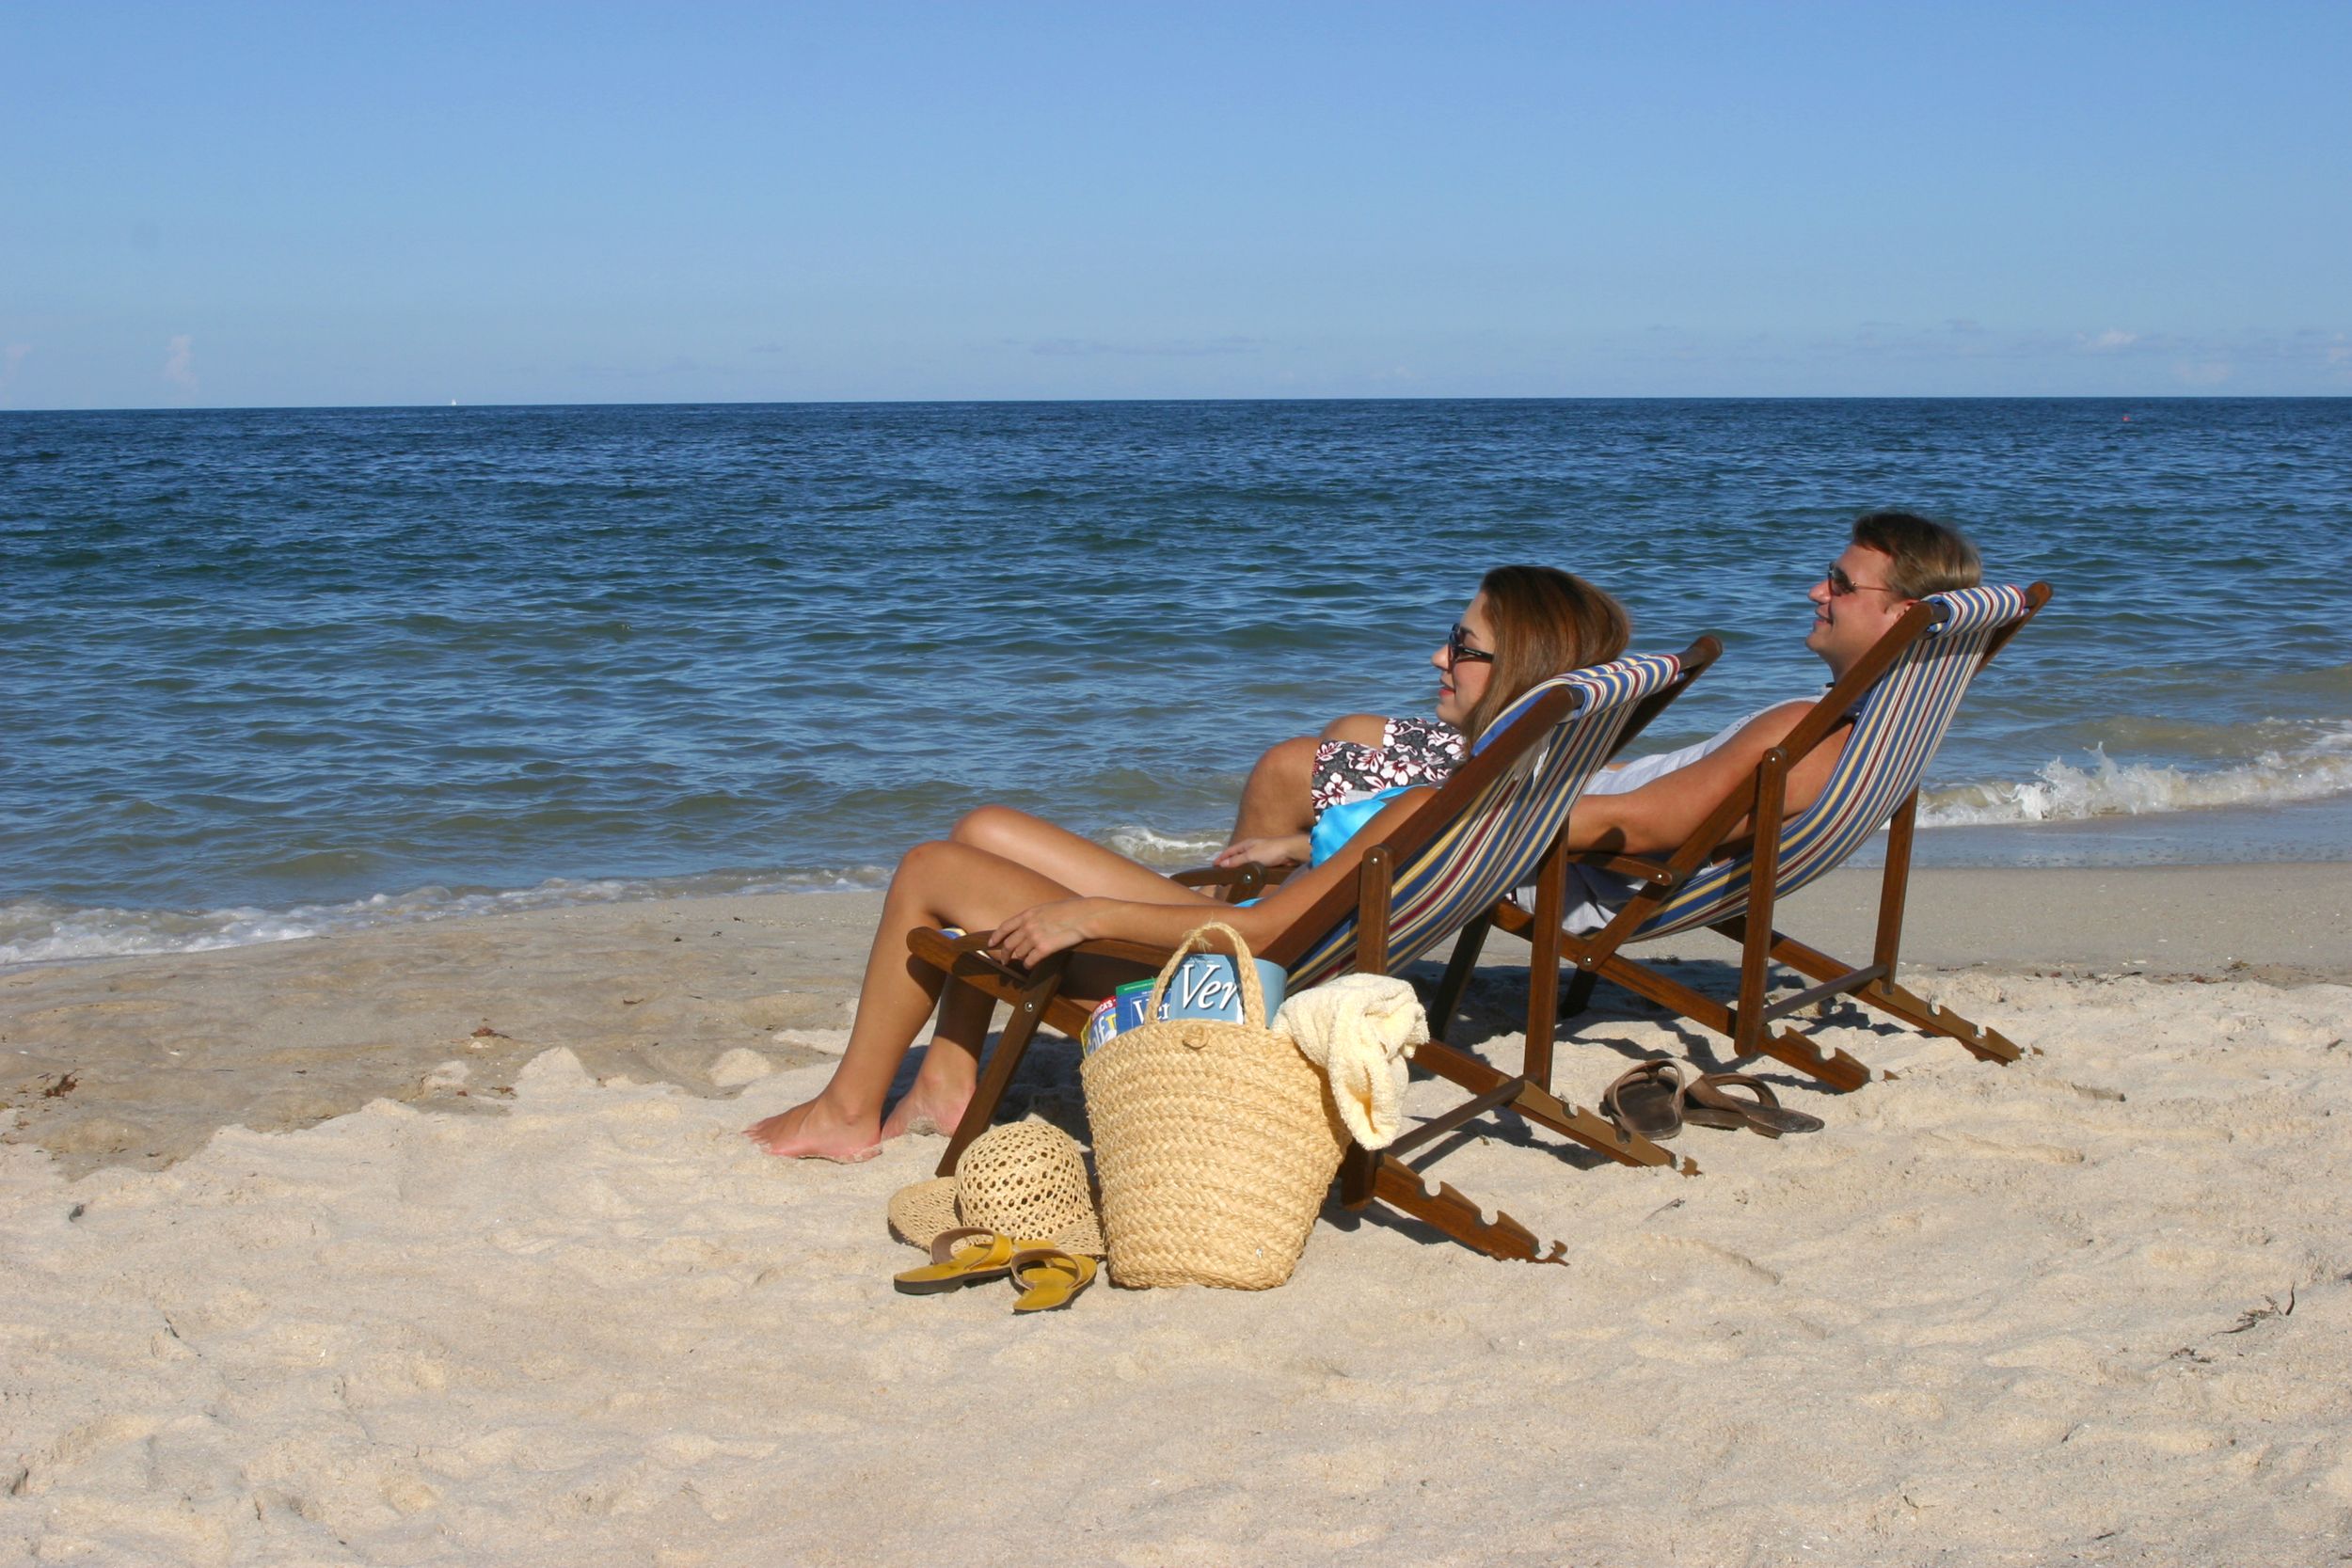 Two people recline in beach chairs on an uncrowded beach.